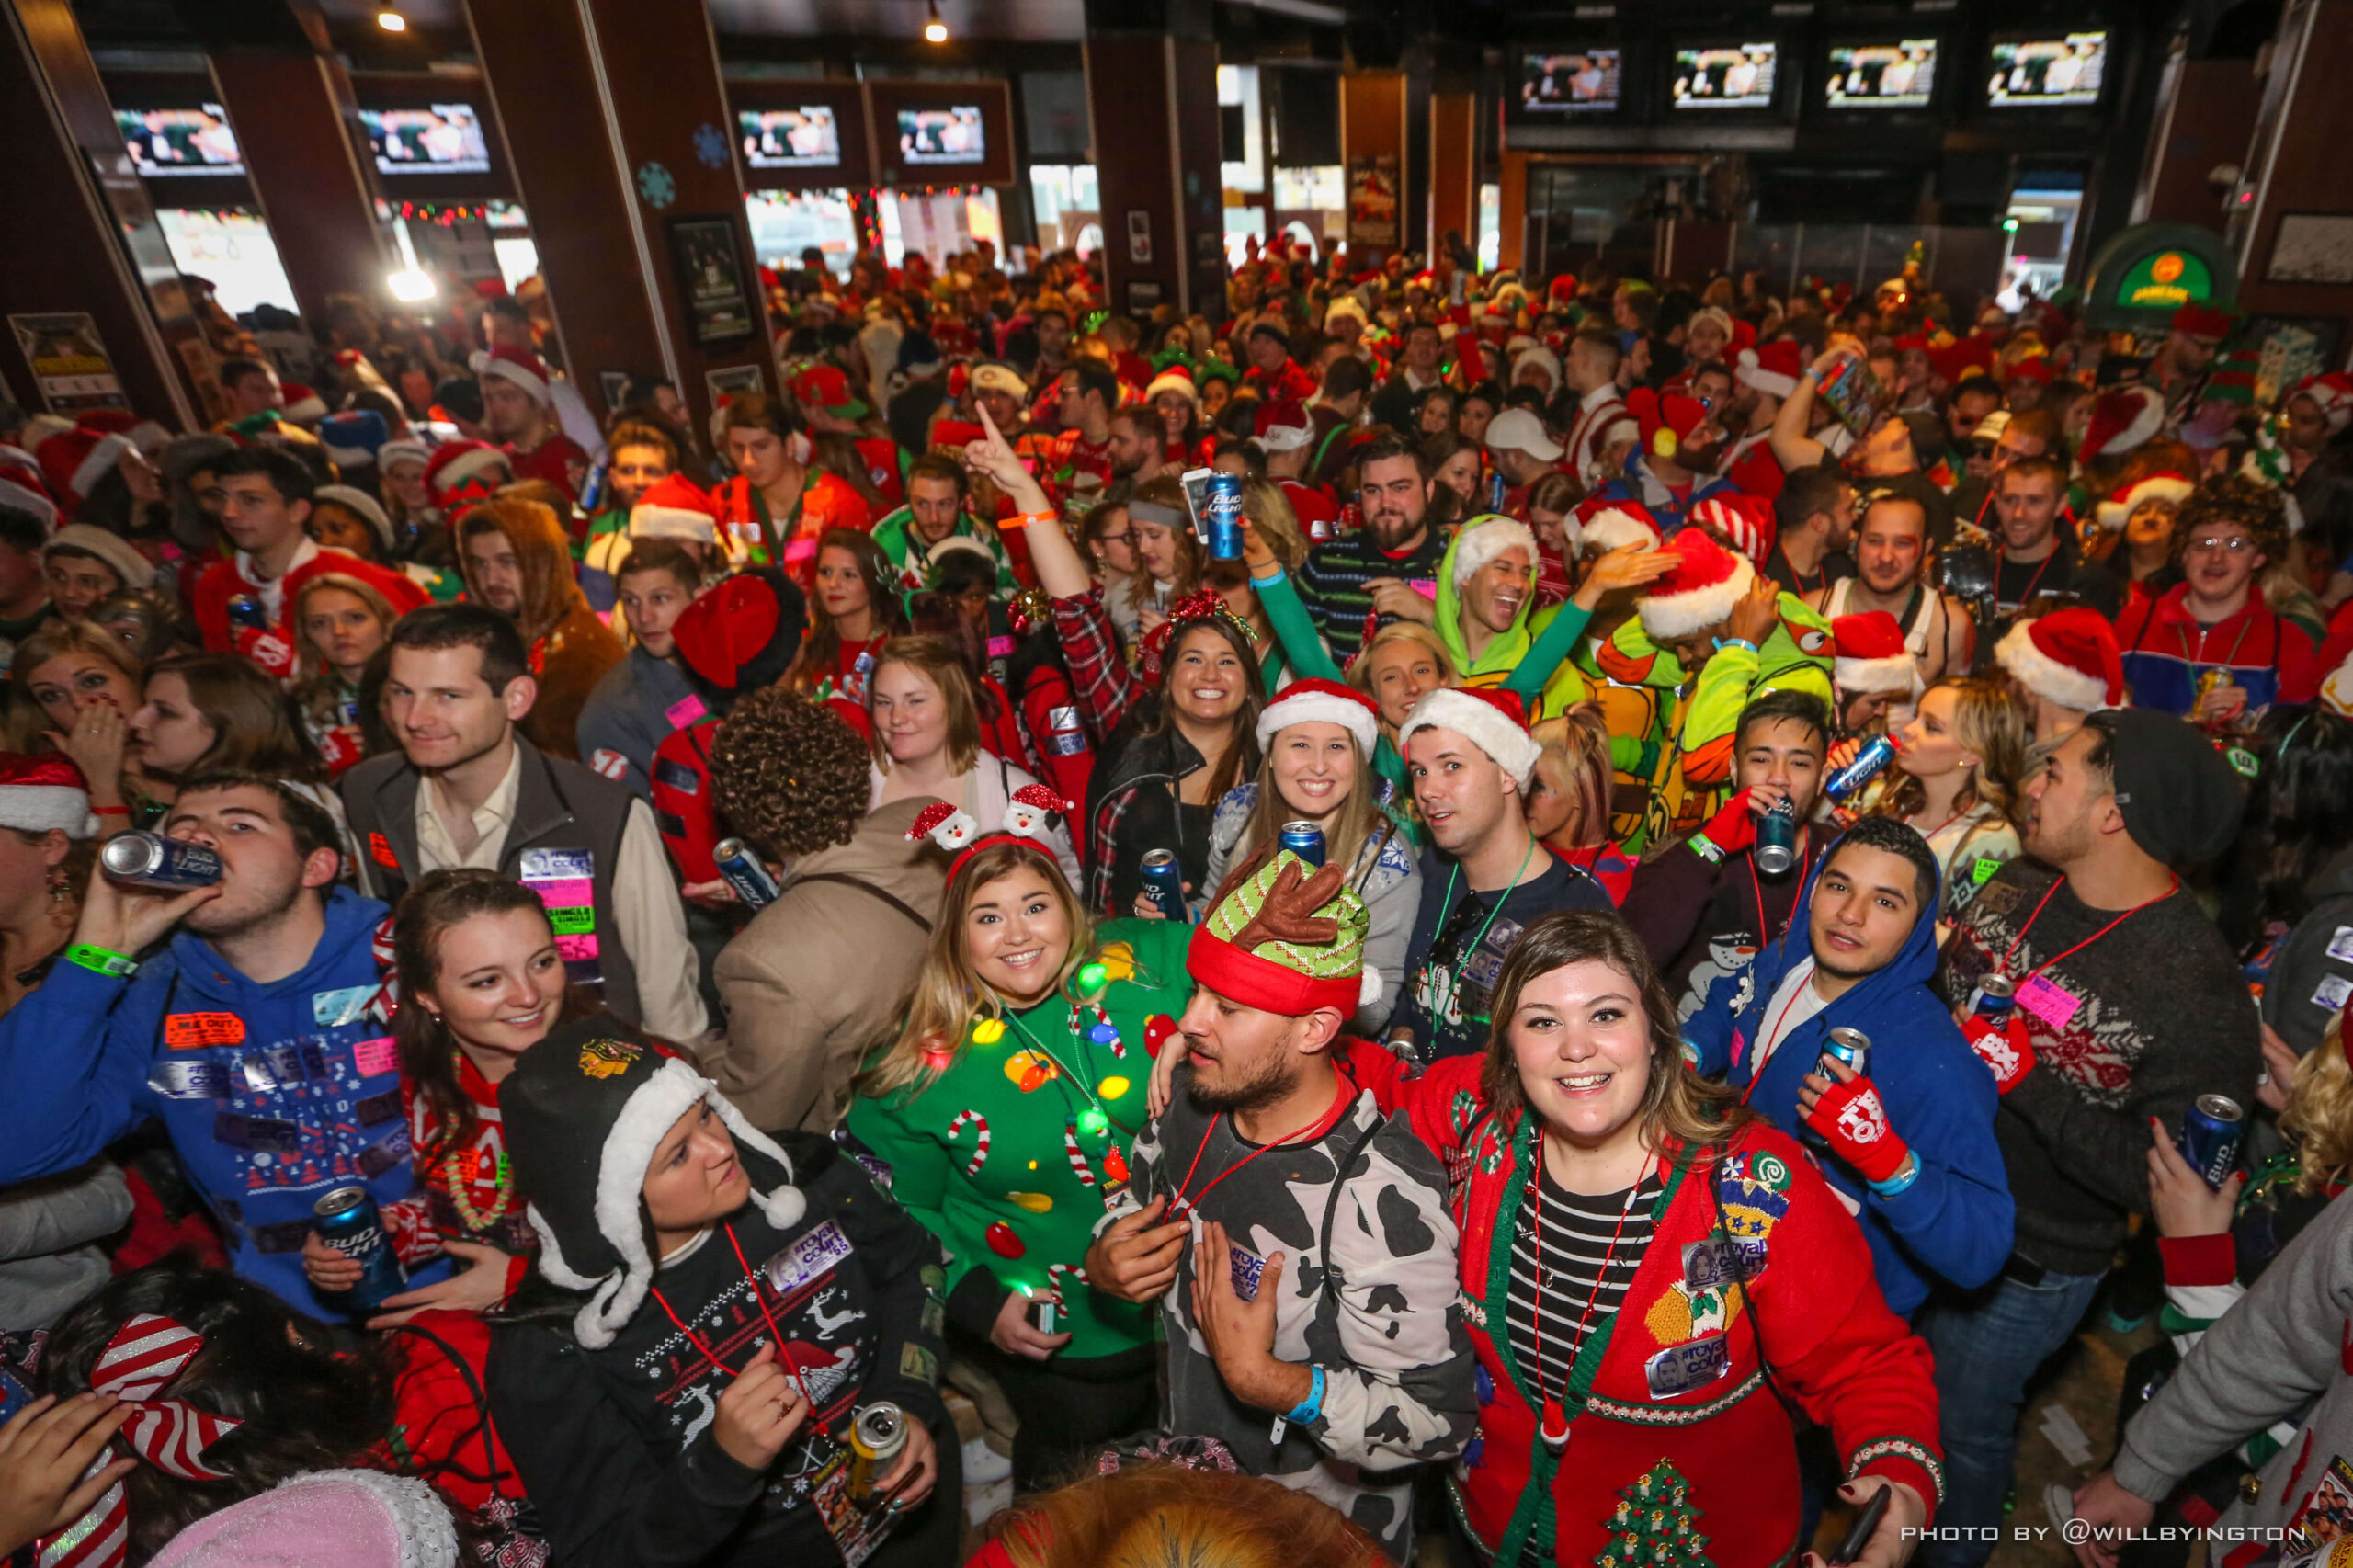 A huge room crowded with hundreds of people in red and green Christmas gear.